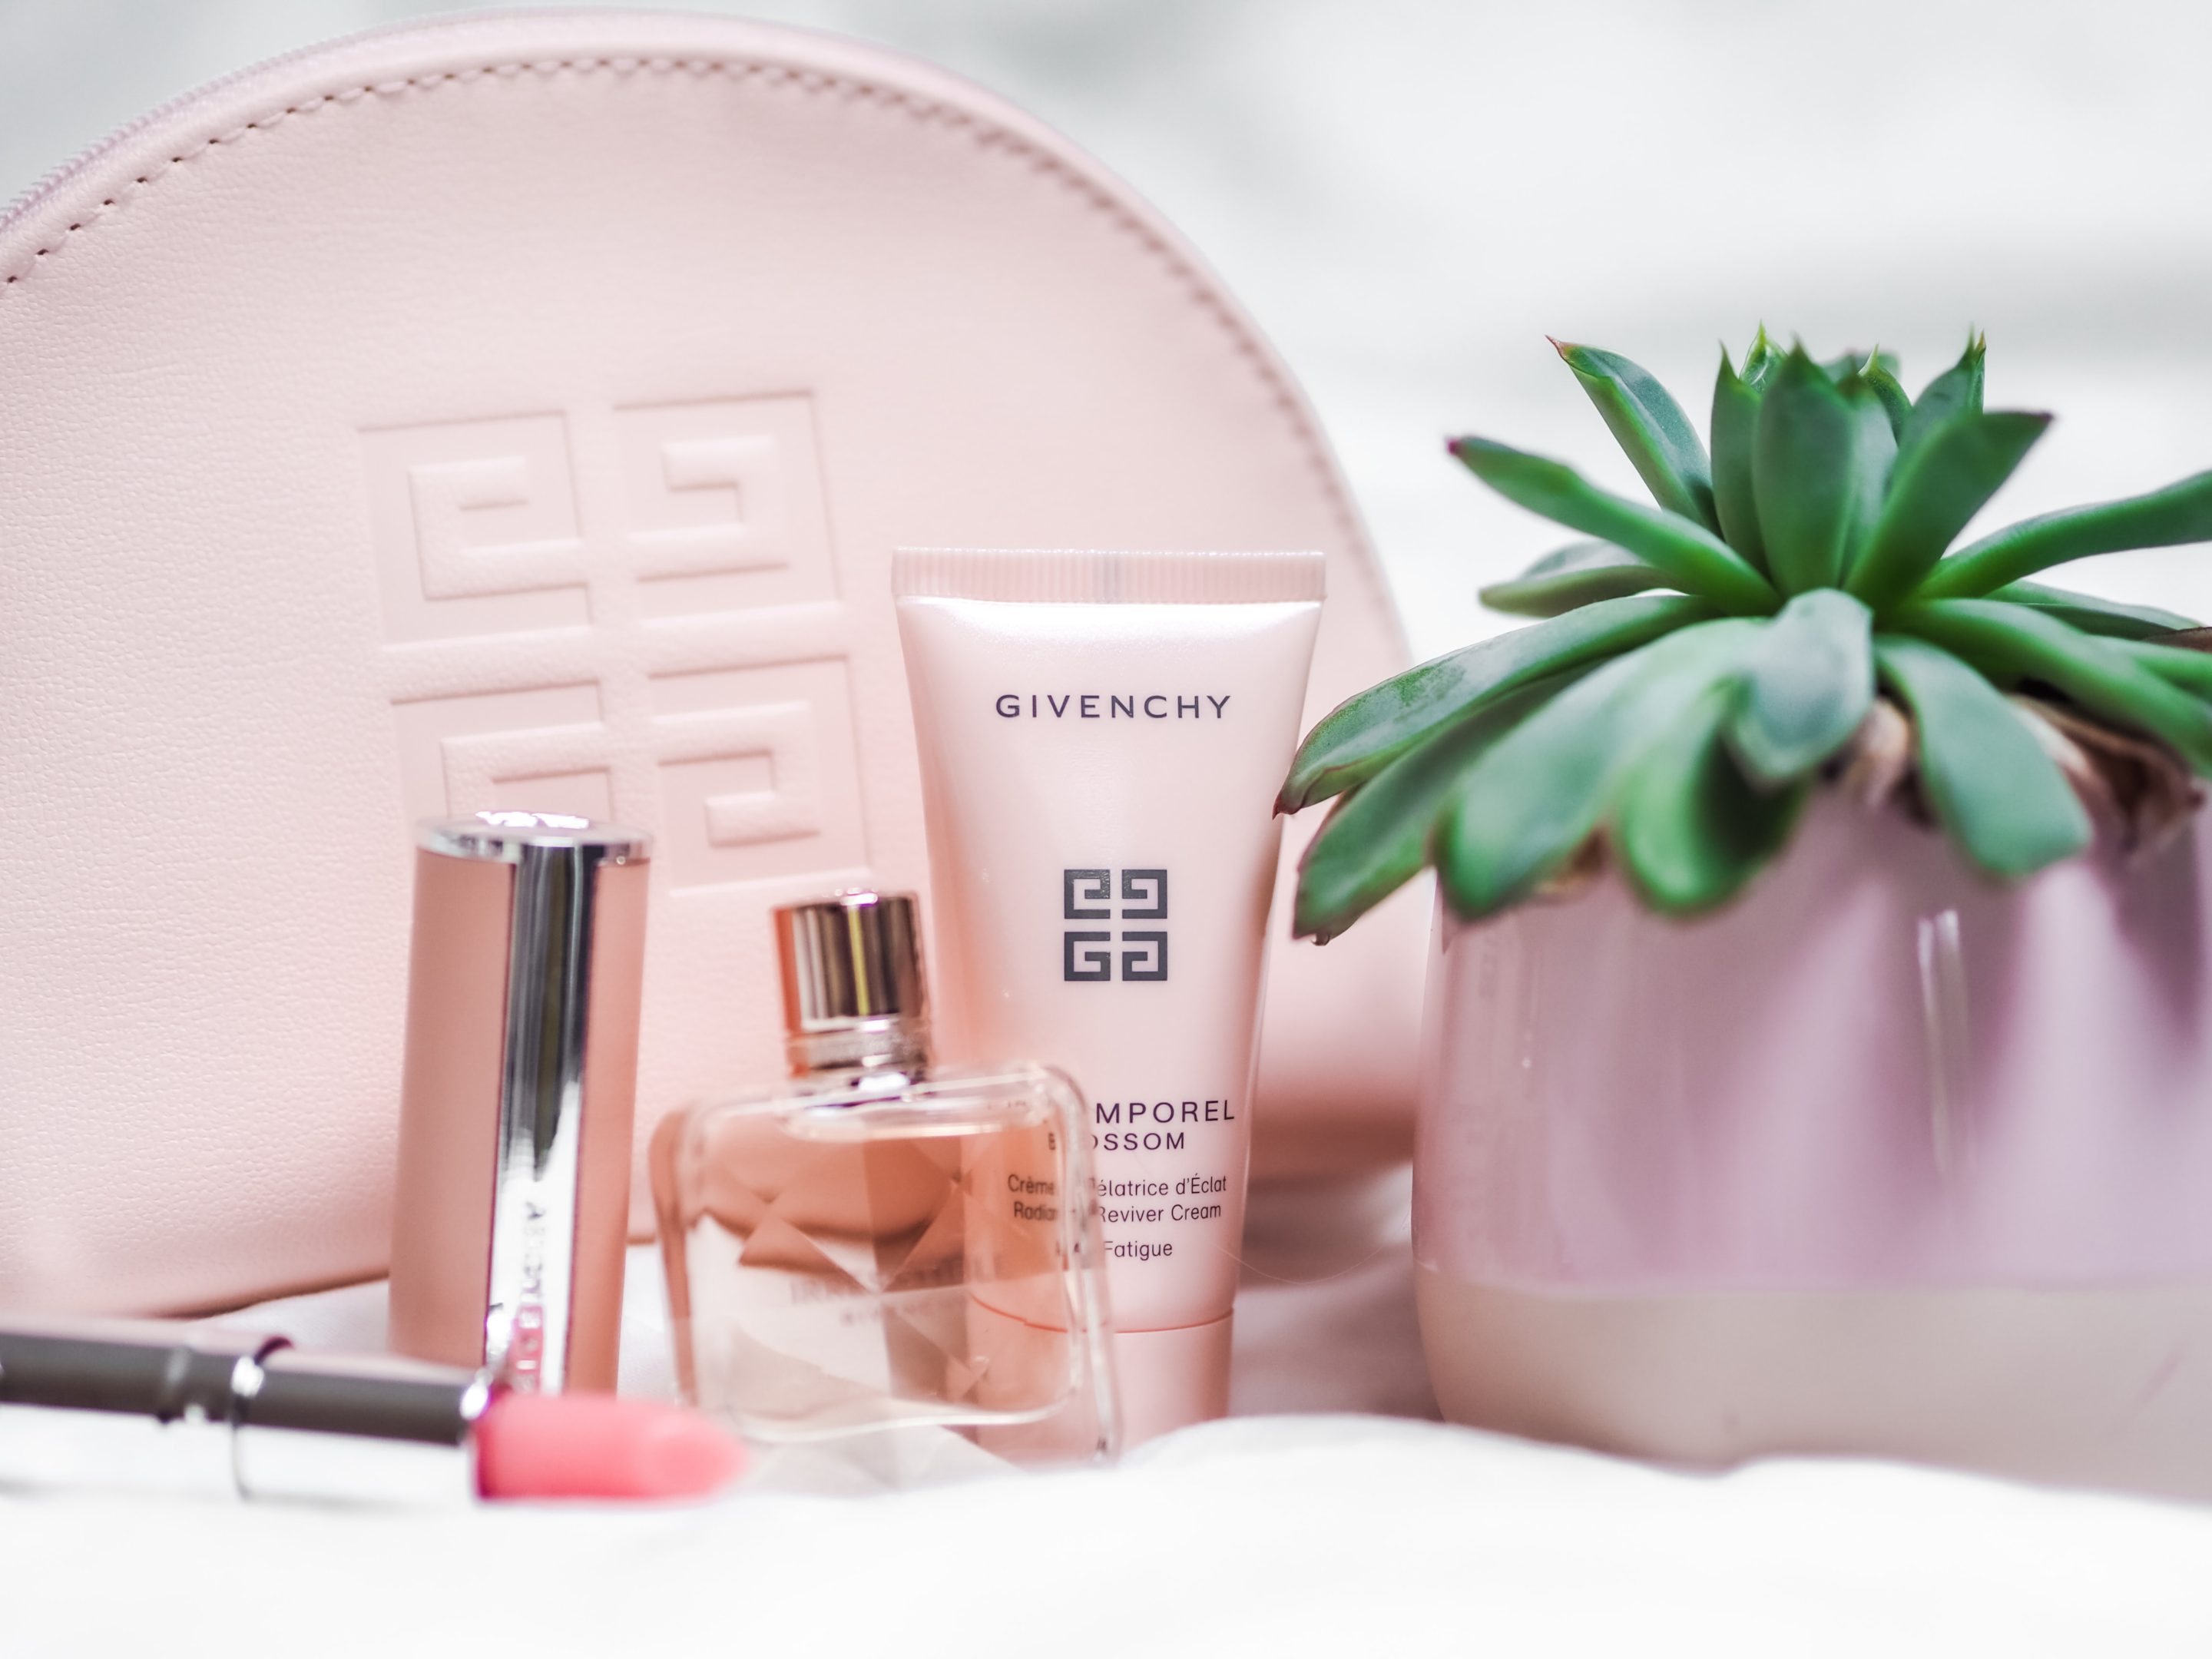 Like many luxury fashion brands, Givenchy now offers a range of perfumes, fragrances, makeup, and skincare products | Photo by Laura Chouette from Unsplash